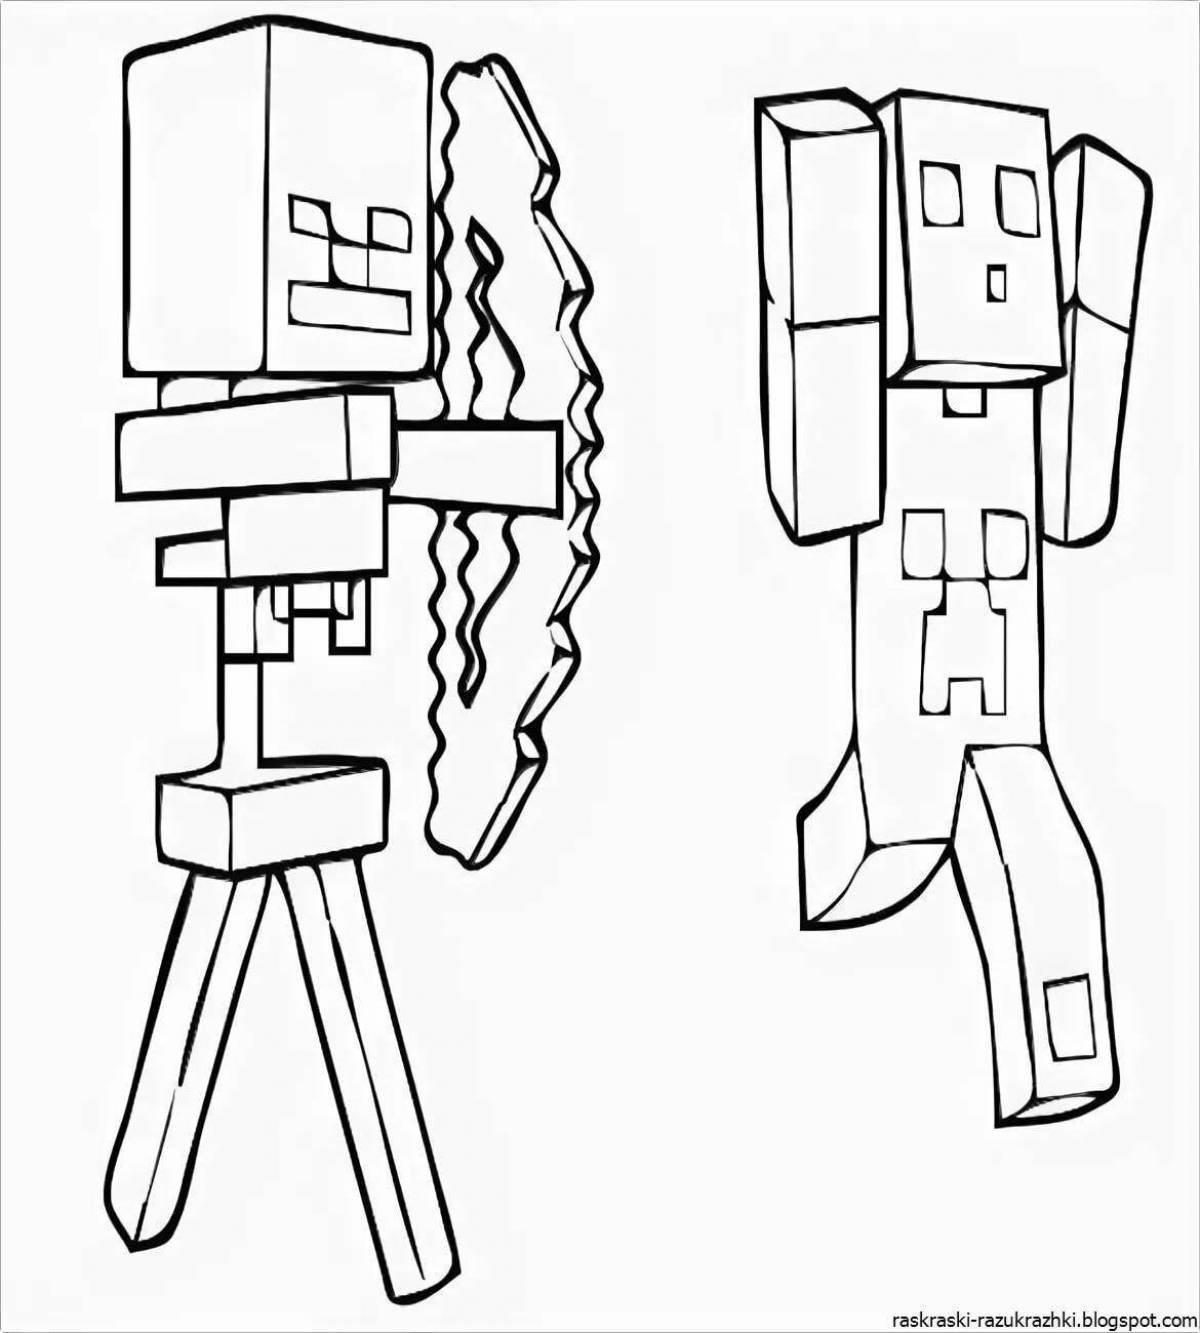 Minecraft mystery weapon coloring page